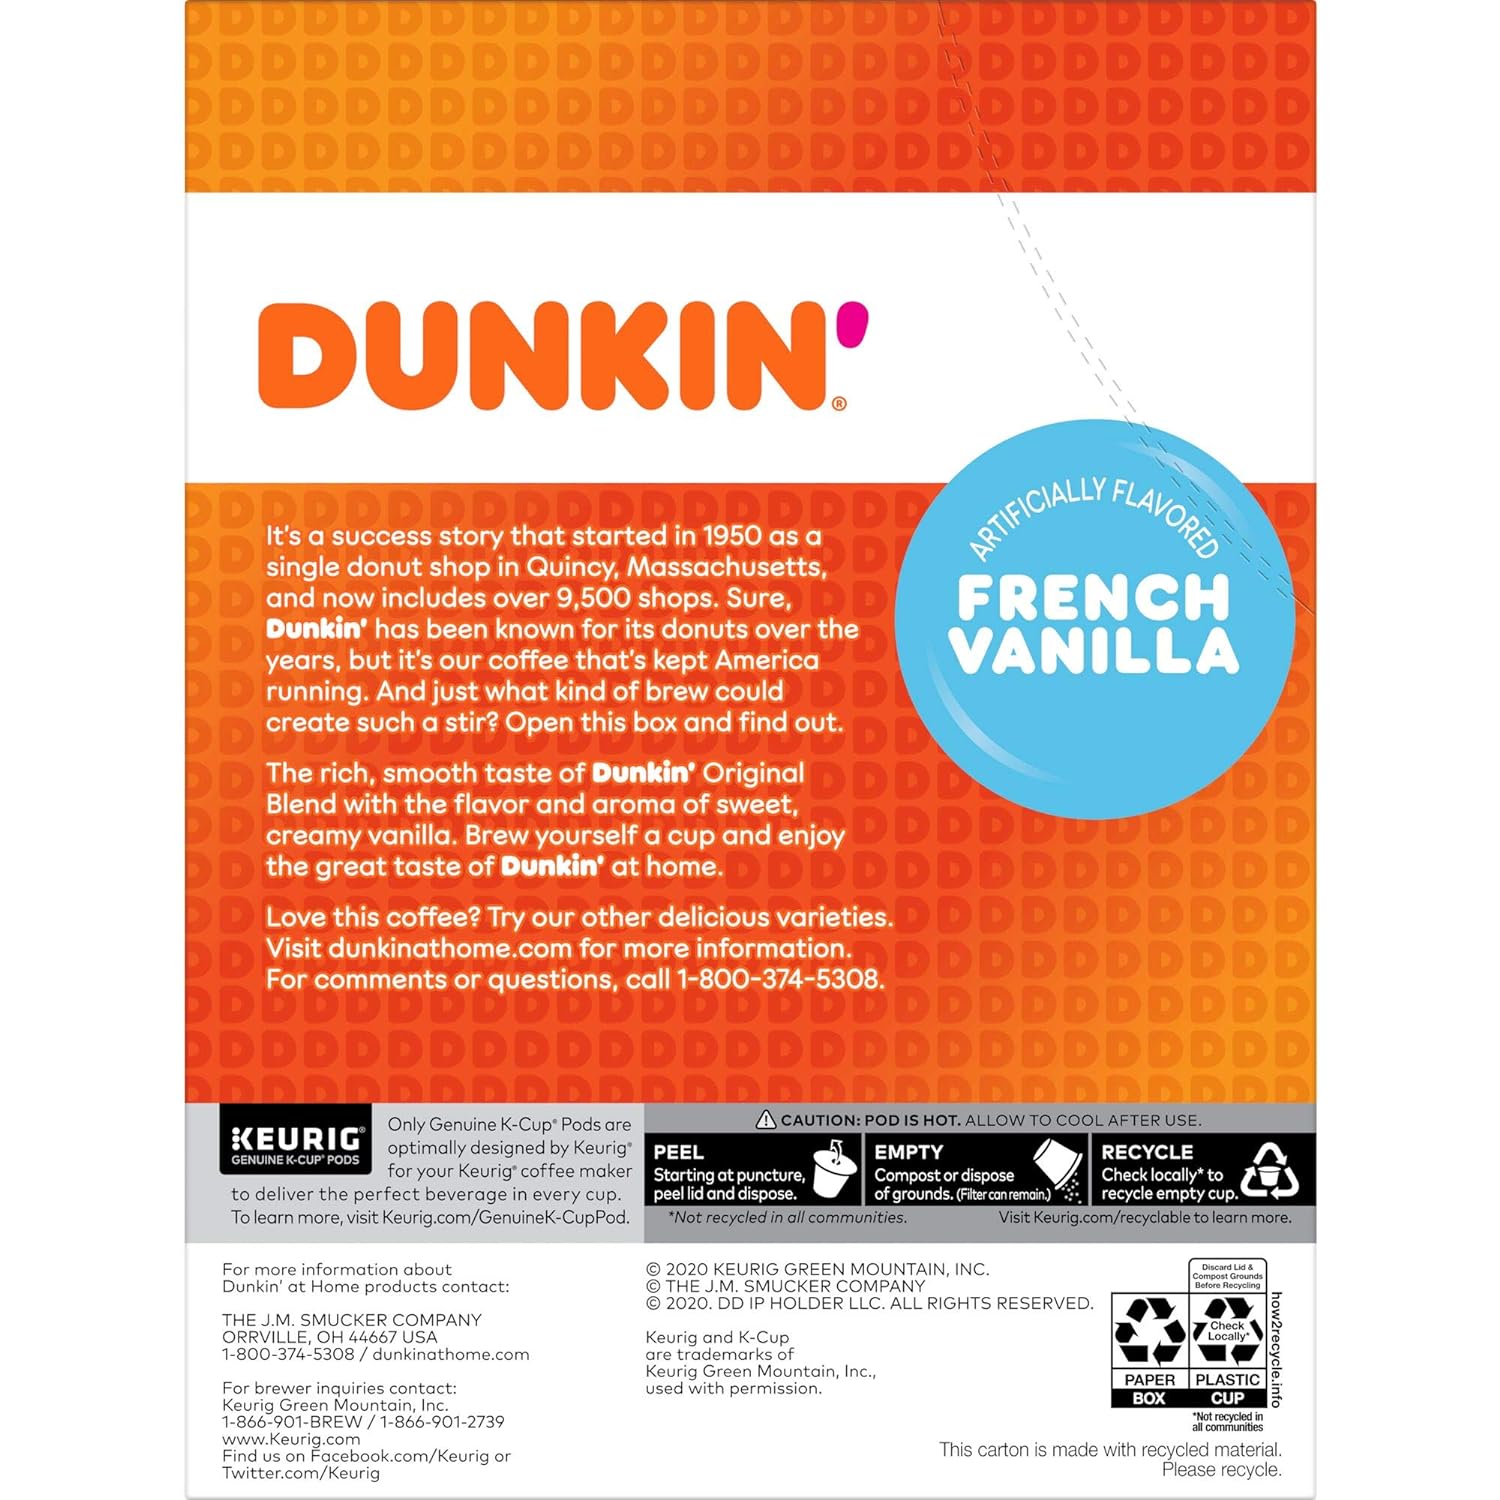 Dunkin French Vanilla Flavored Coffee, 22 Keurig K-Cup Pods